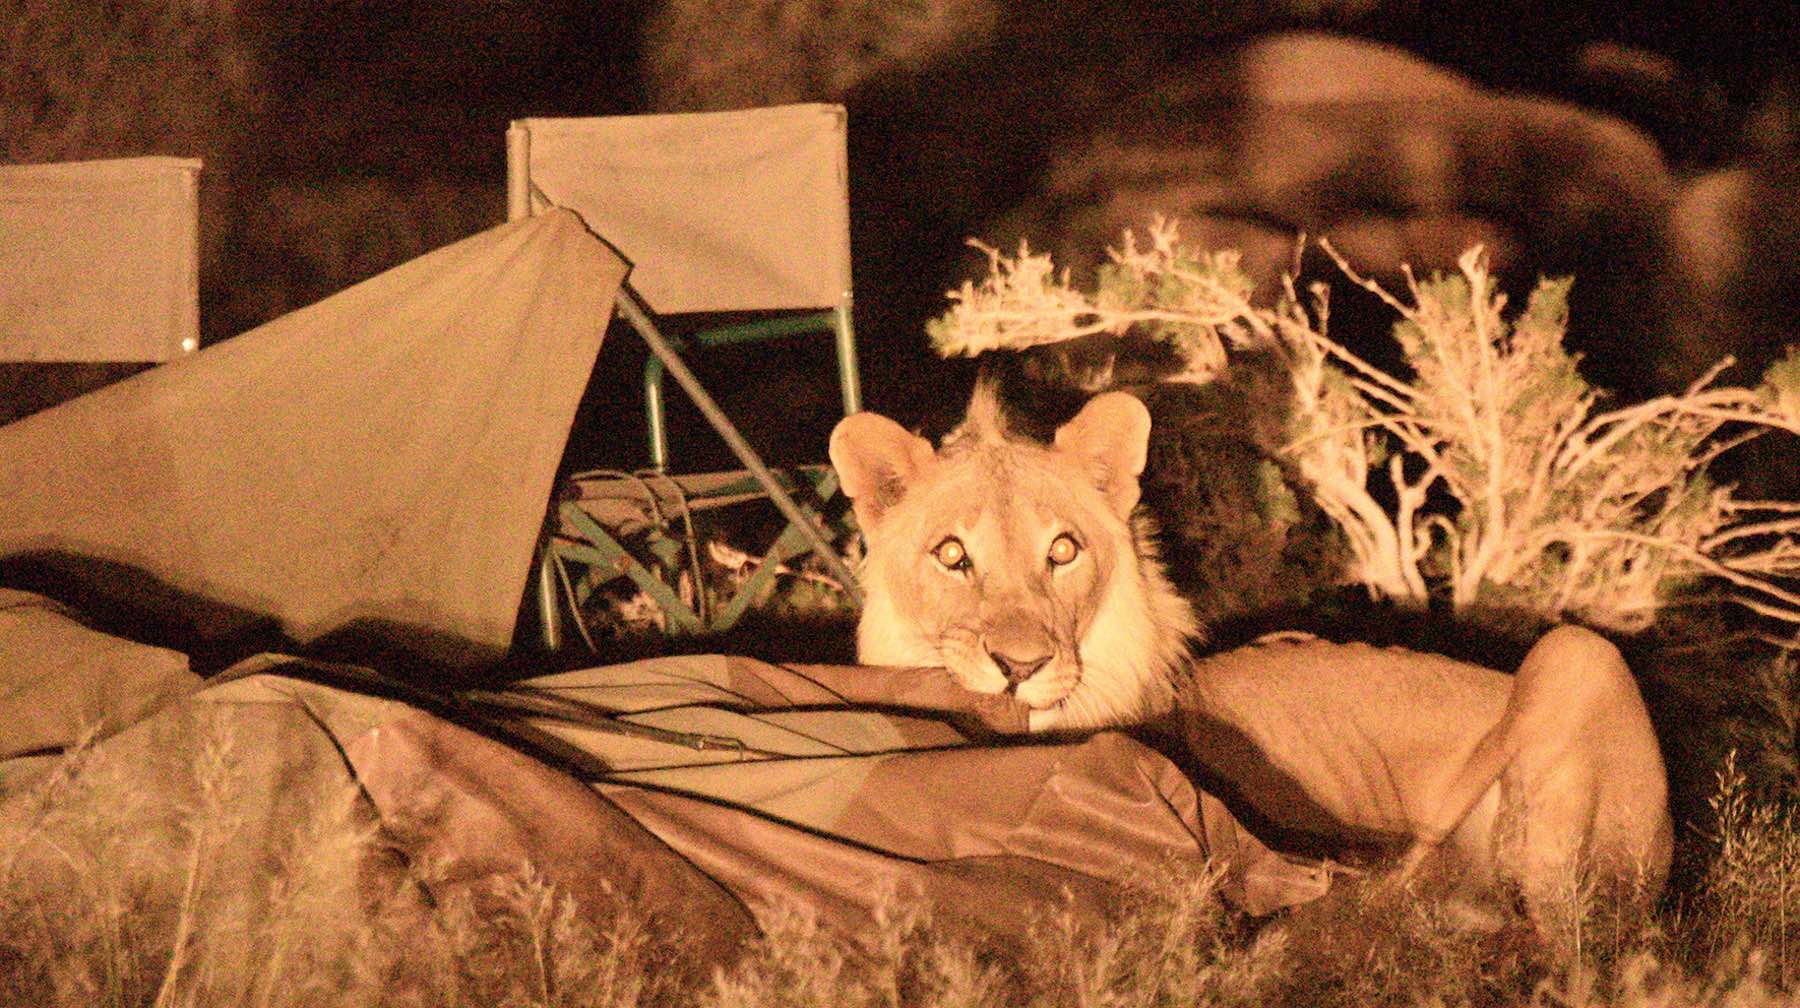 A lion chews on the corner of a canvas tent, while camp chairs sit in disarray behind him.